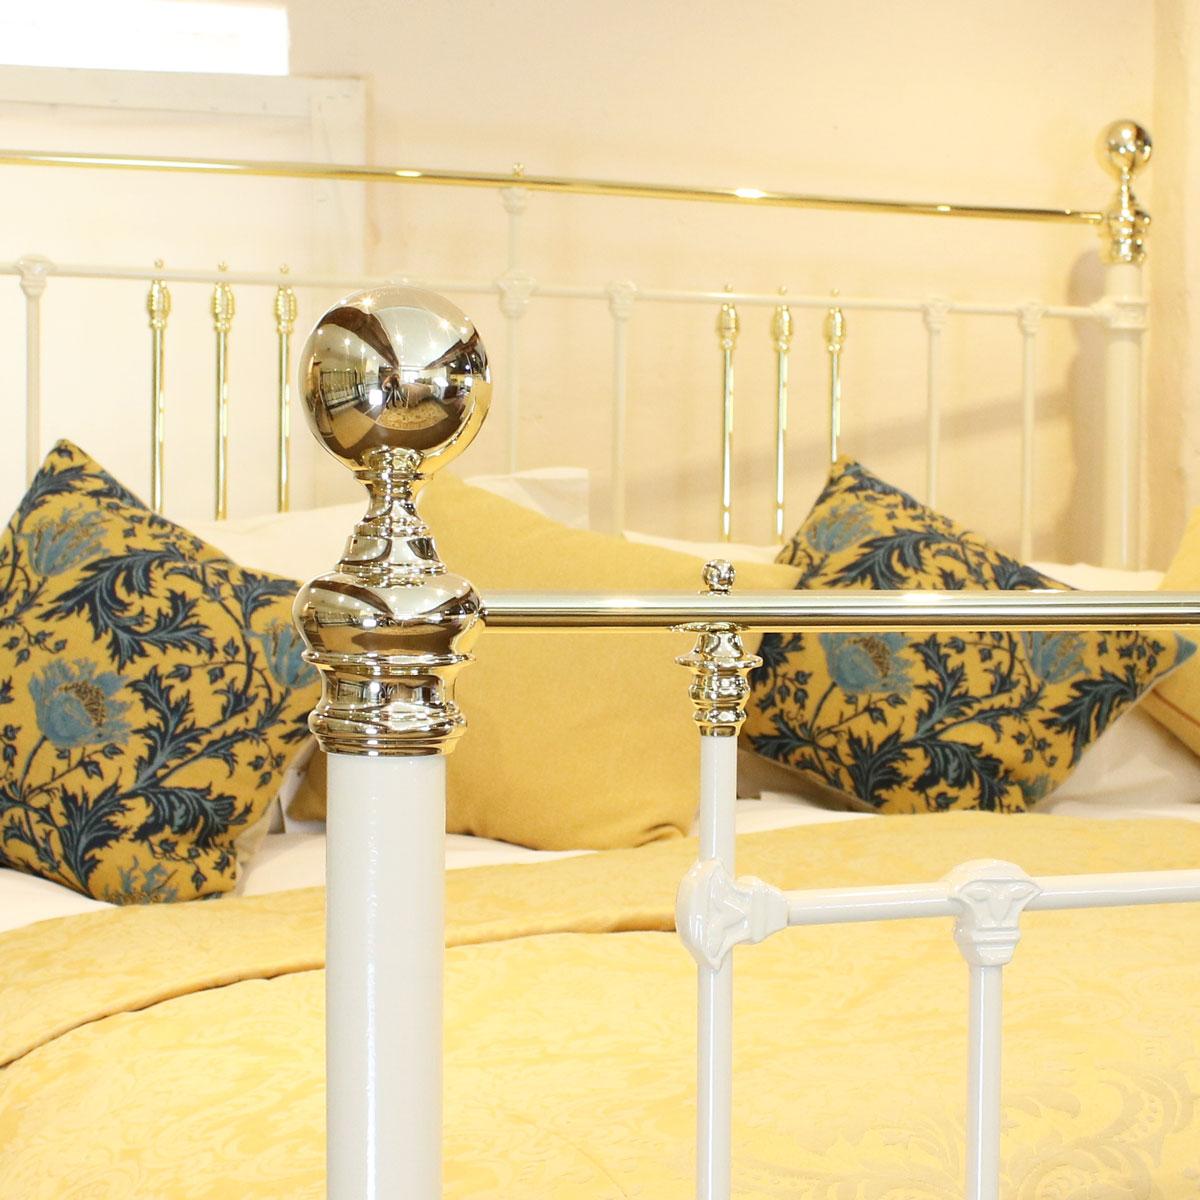 Quality cast iron a brass bed adapted to the 6'0 width from an original Victorian frame, circa 1890. It features a superb brass Art Nouveau plaque in the center of the foot panel and also brass 